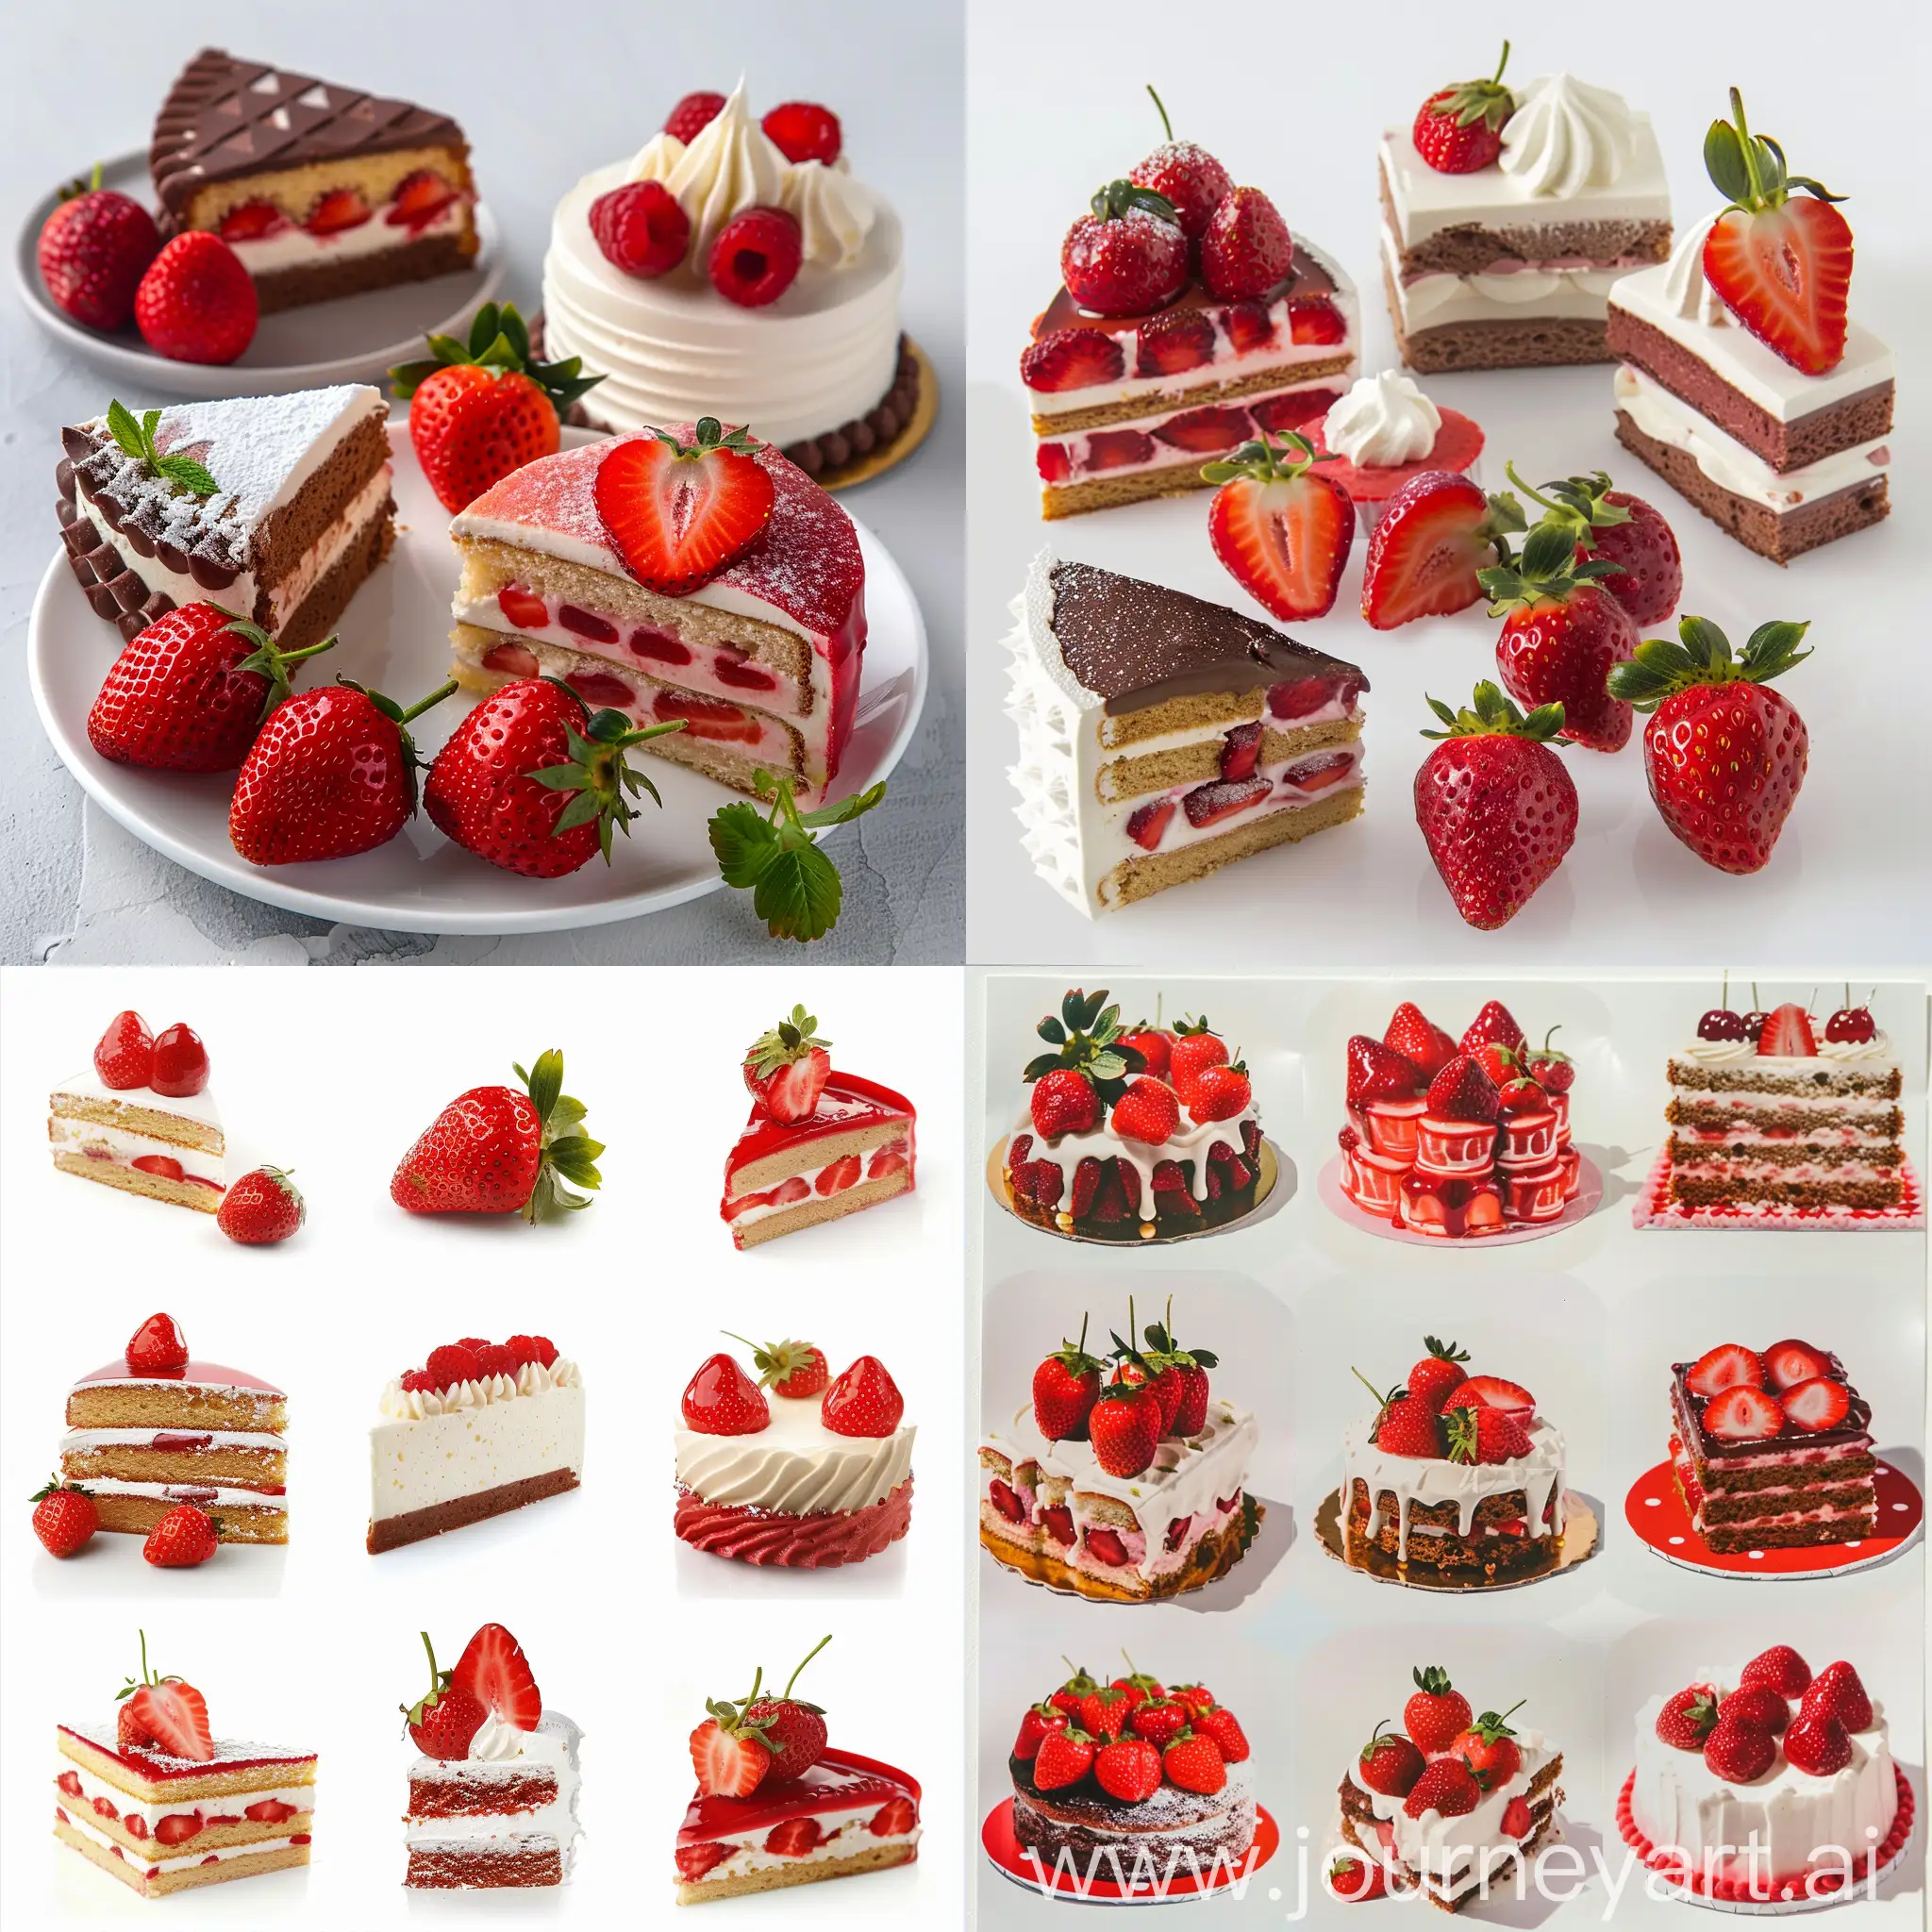 On a white background measuring 2560 × 1440 pixels, depict strawberries in different versions and different types of cakes